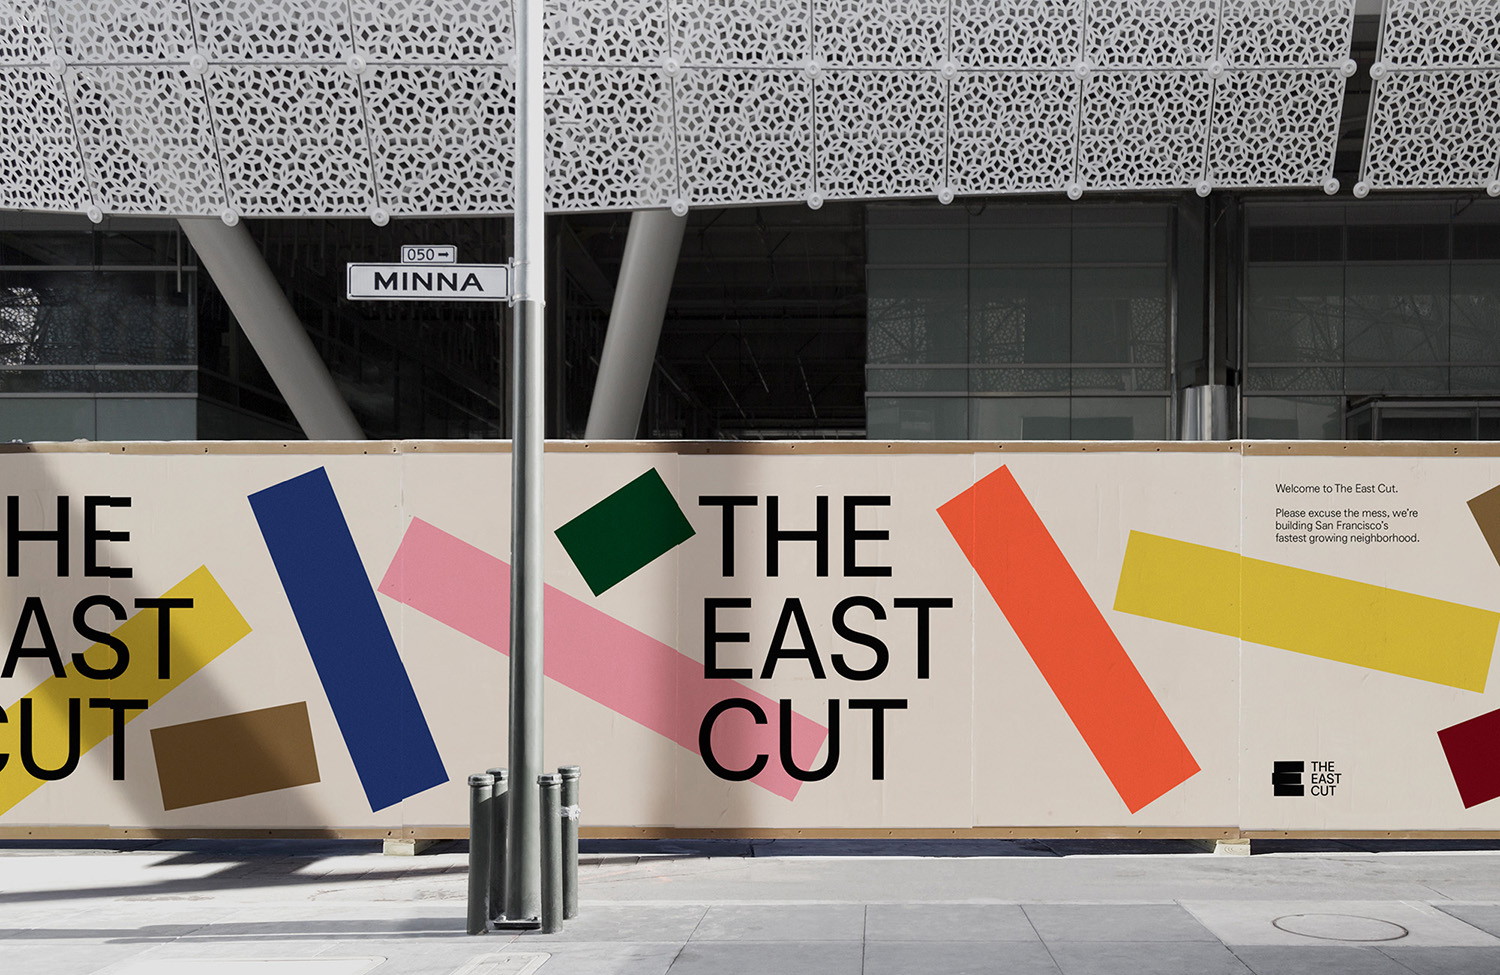 Graphic identity and hoarding designed by Collins for the new San Francisco neighbourhood of The East Cut